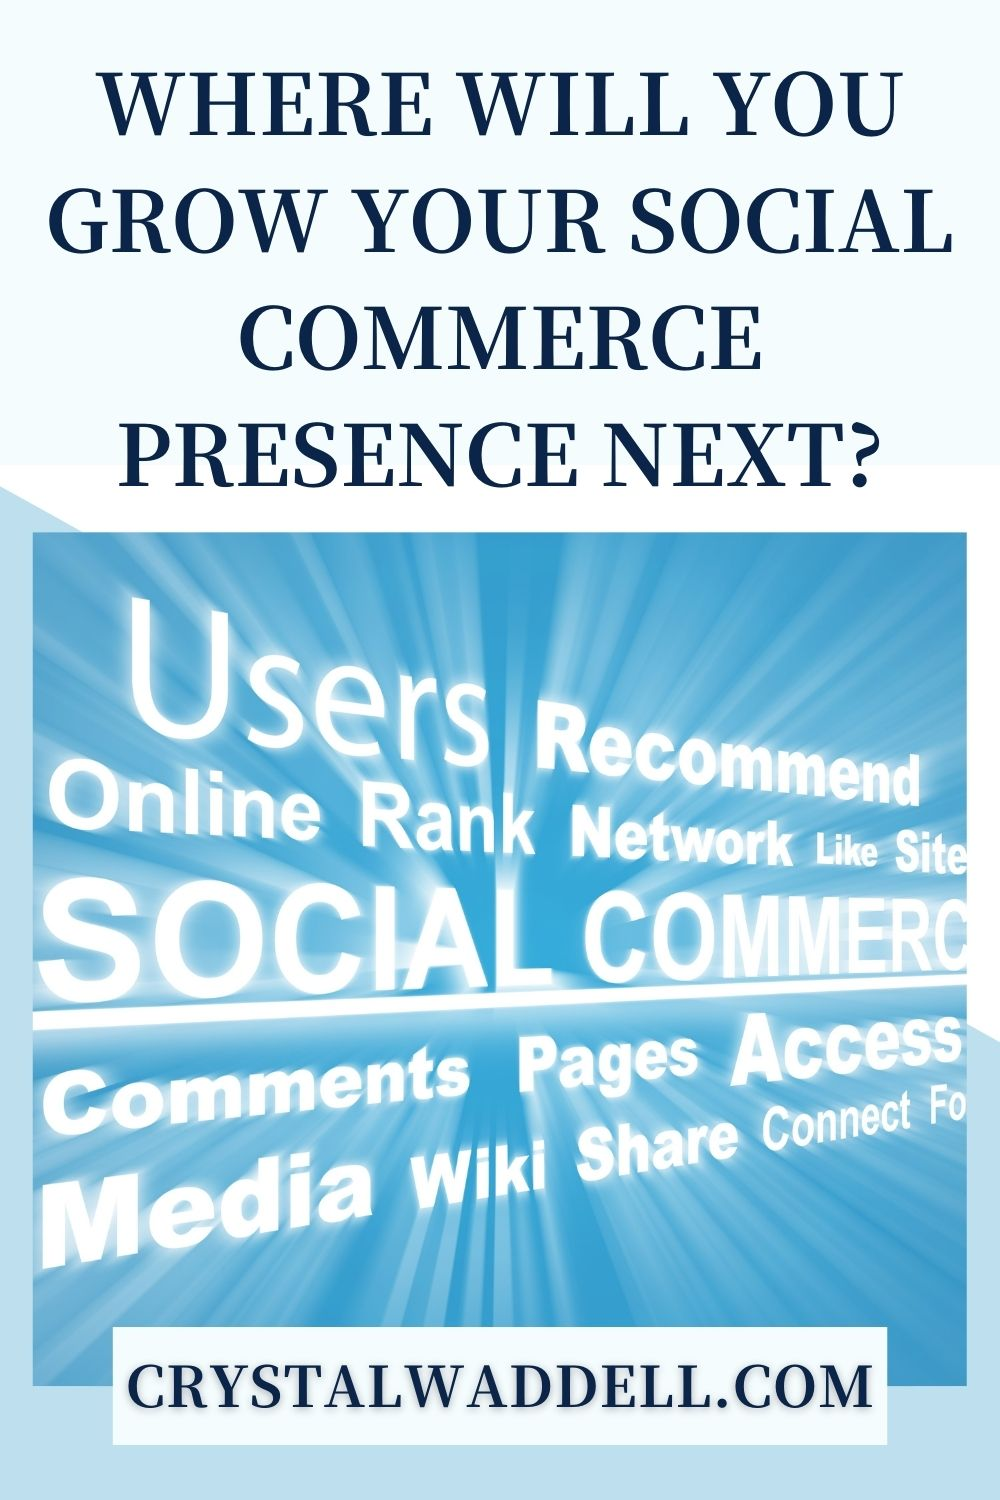 Where will you grow your social commerce presence next?